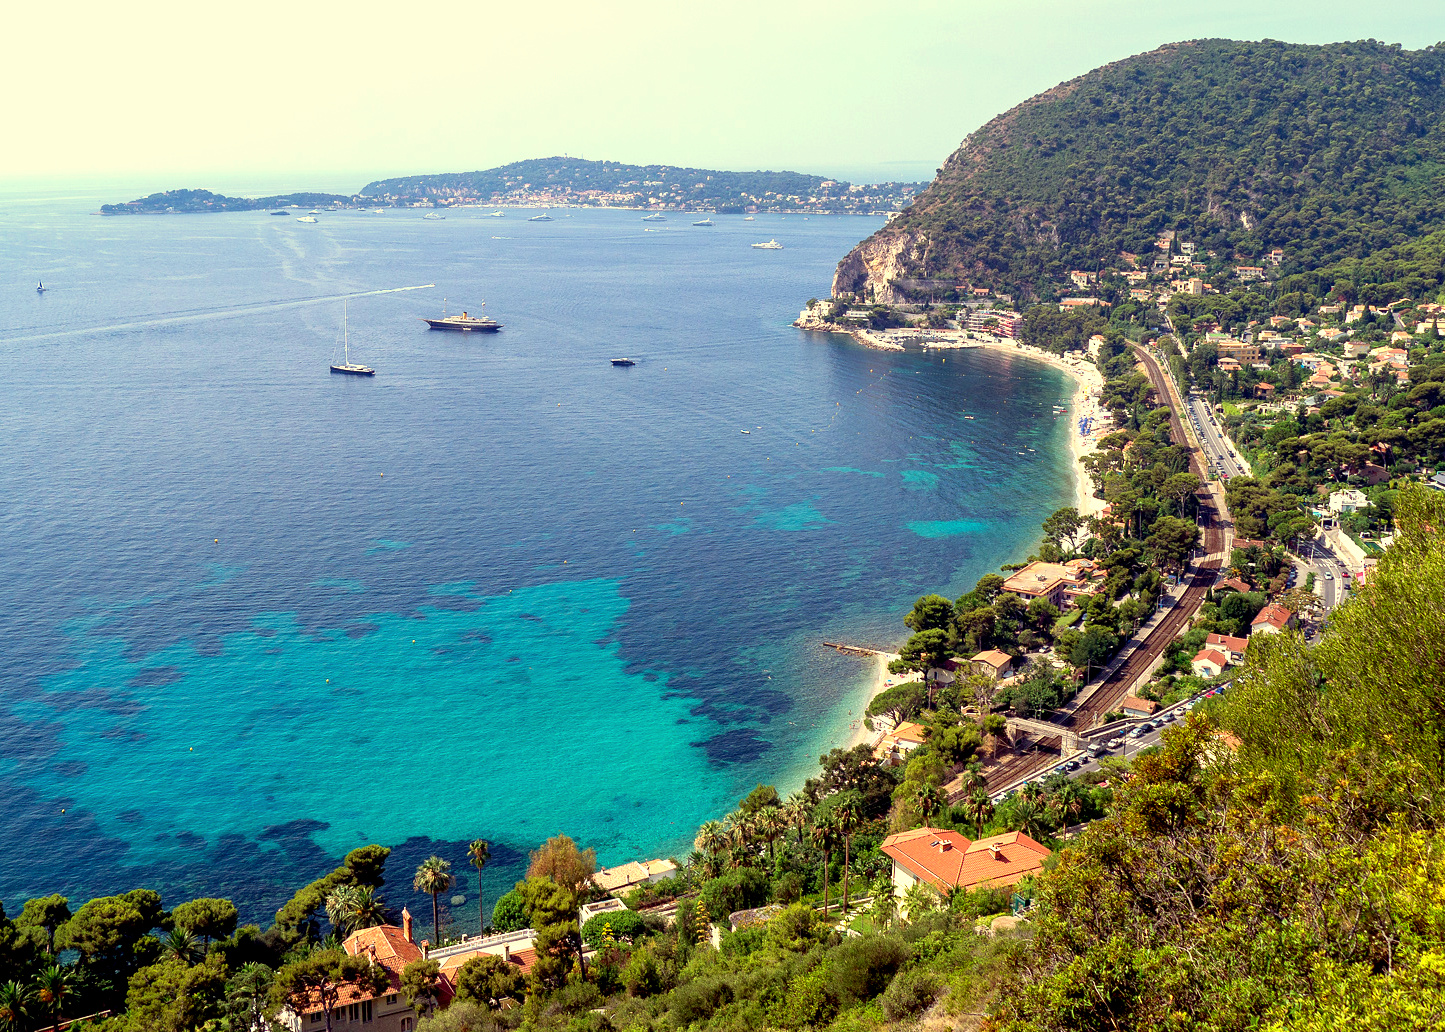 Your friendly, knowledgeable guide on the Riviera